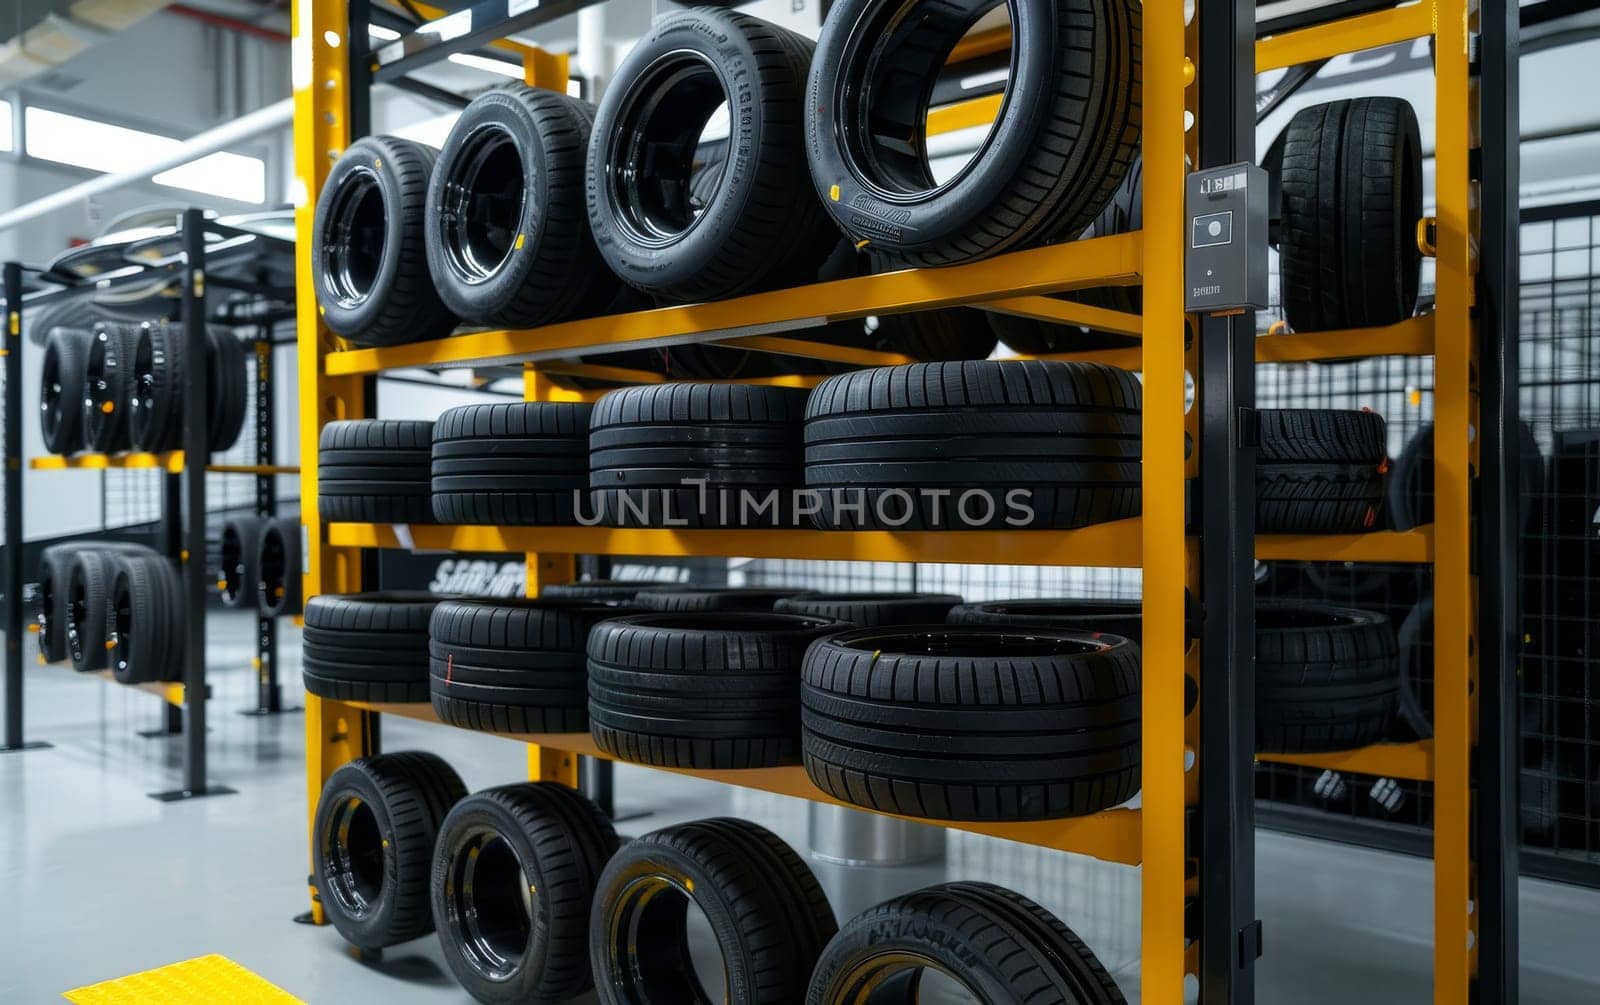 A modern warehouse interior filled with yellow racks holding an array of car tires, highlighting an efficient and organized storage system for automotive parts